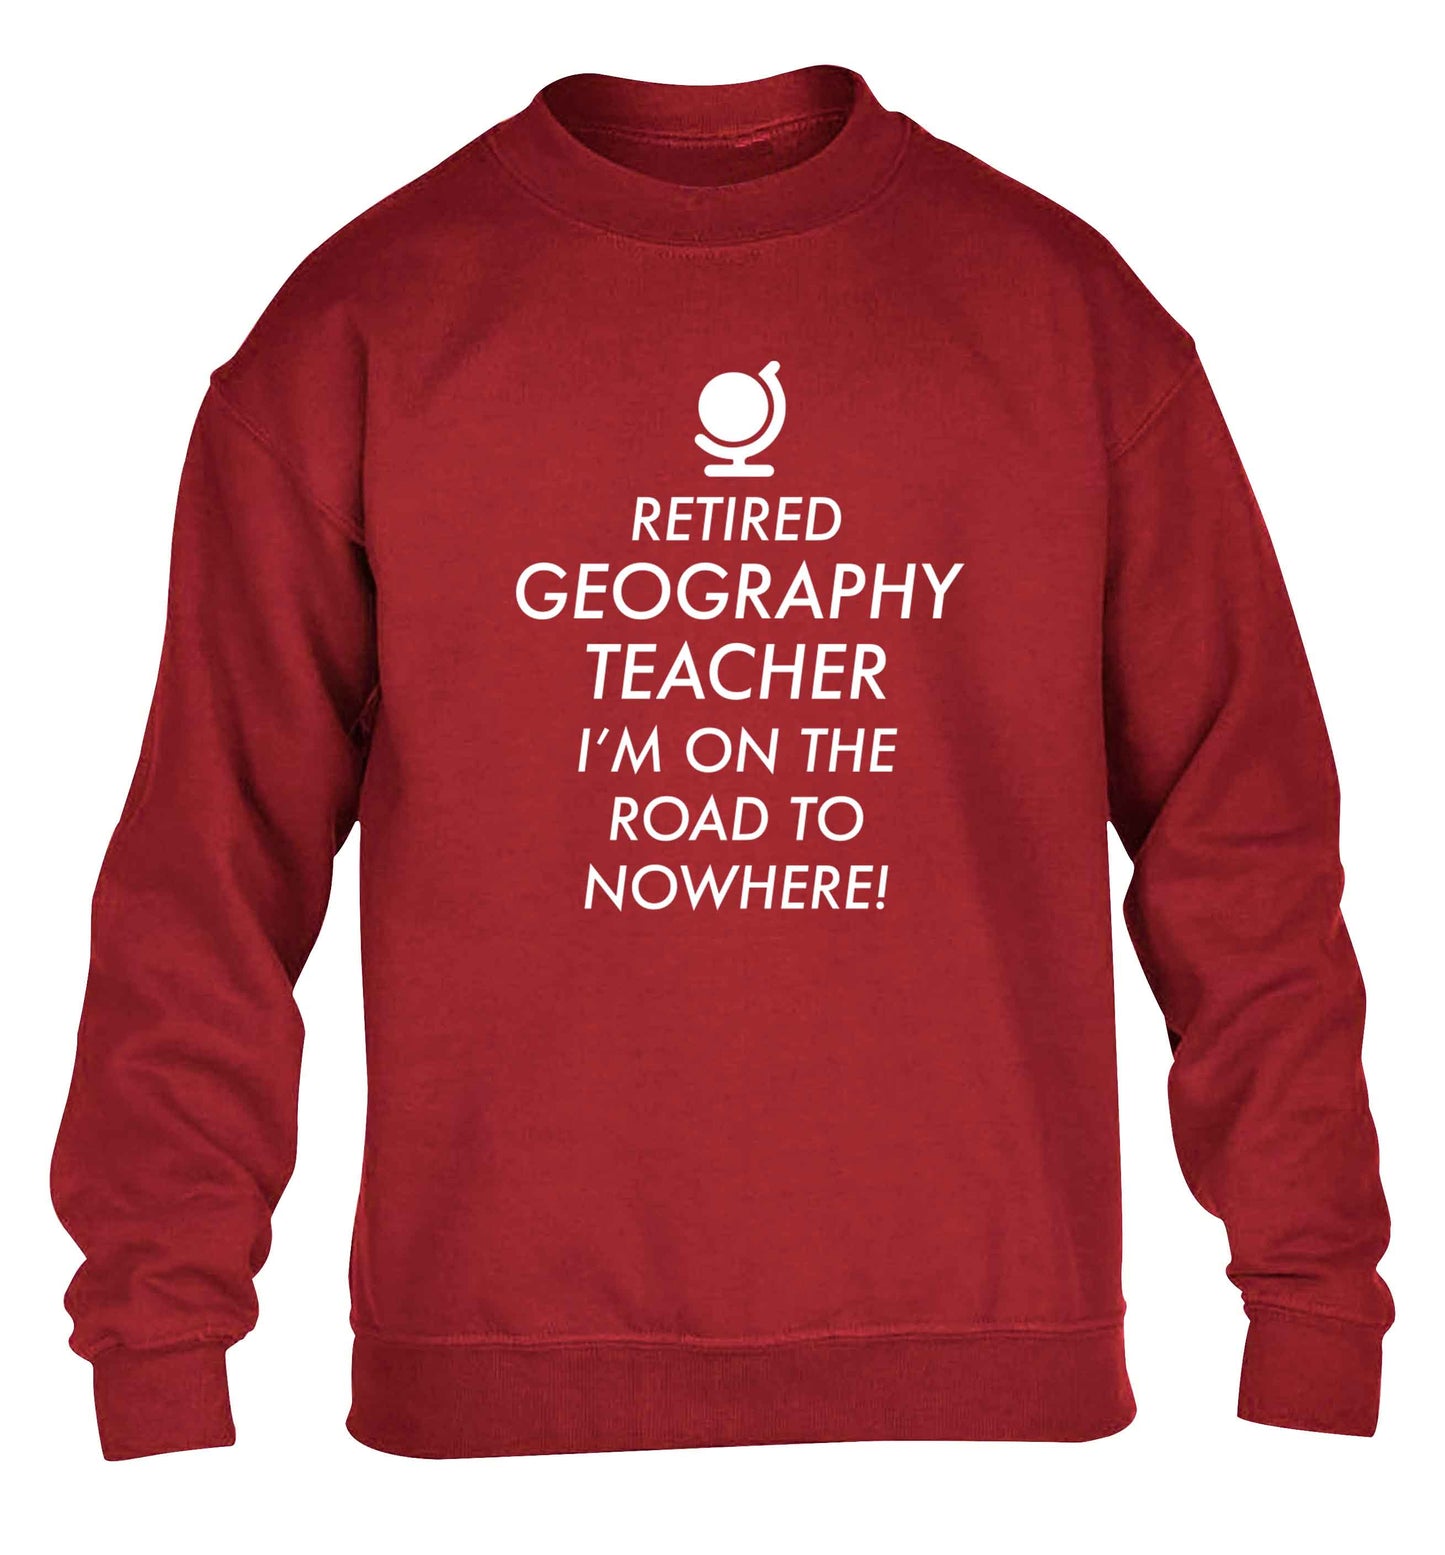 Retired geography teacher I'm on the road to nowhere children's grey sweater 12-13 Years